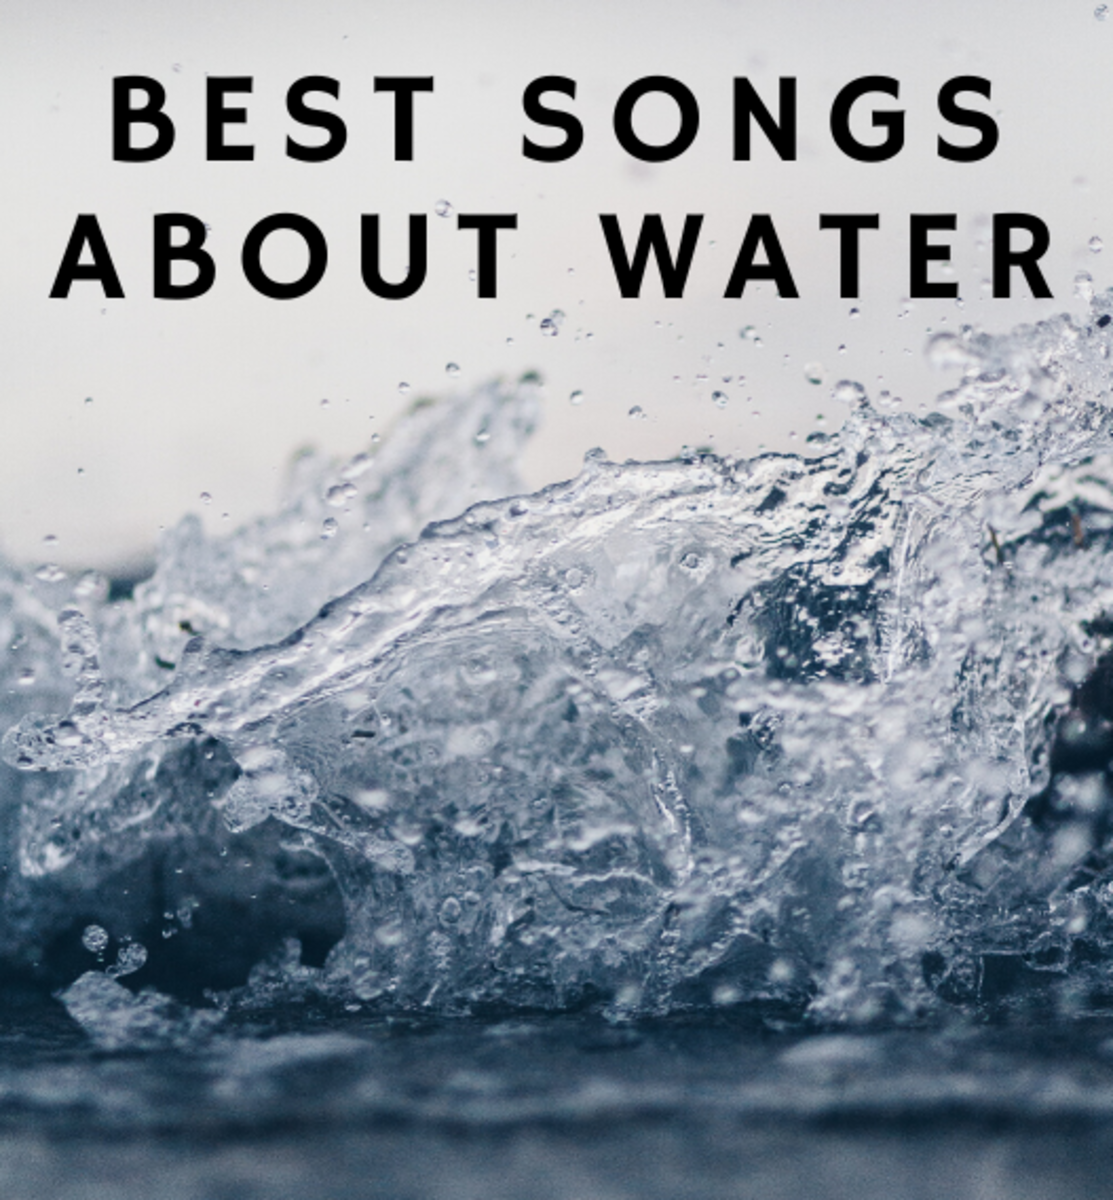 100 Best Songs About Water